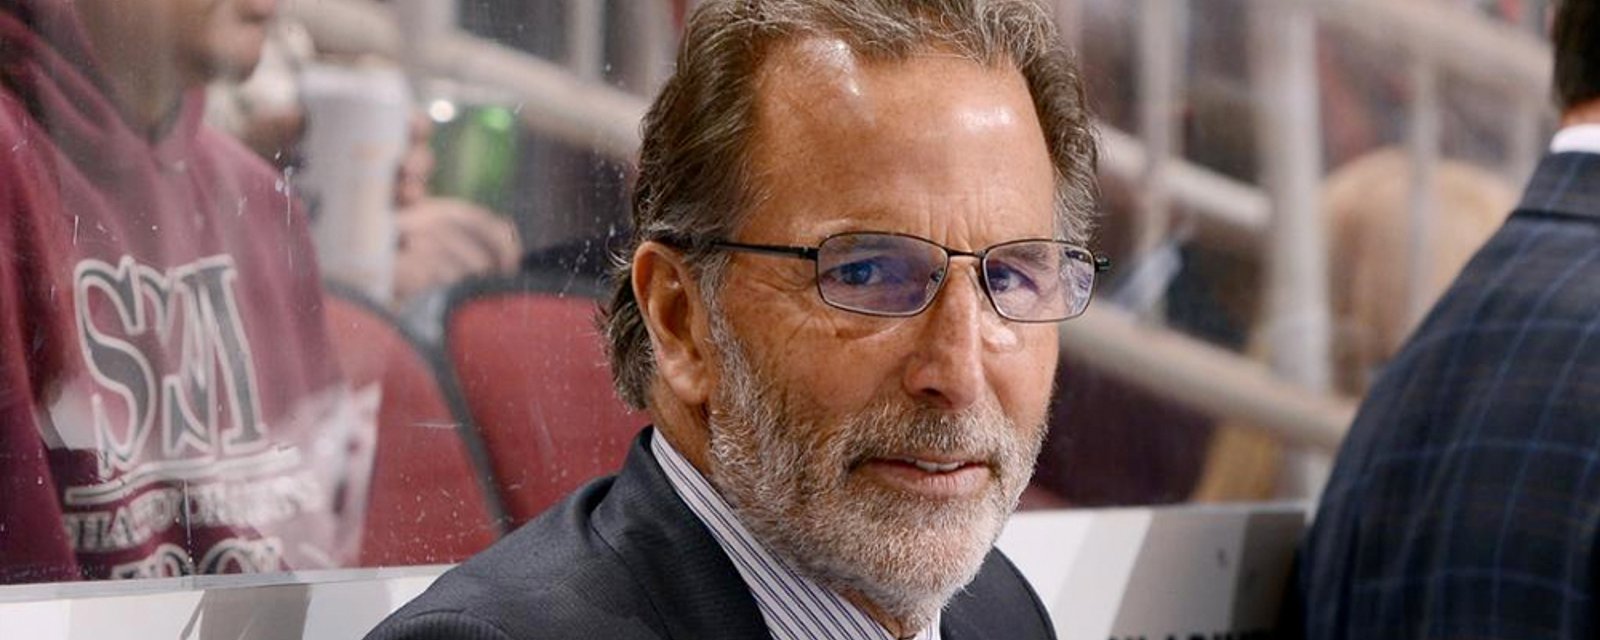 Tortorella changes his opinion on anthem protests after “listening and watching”